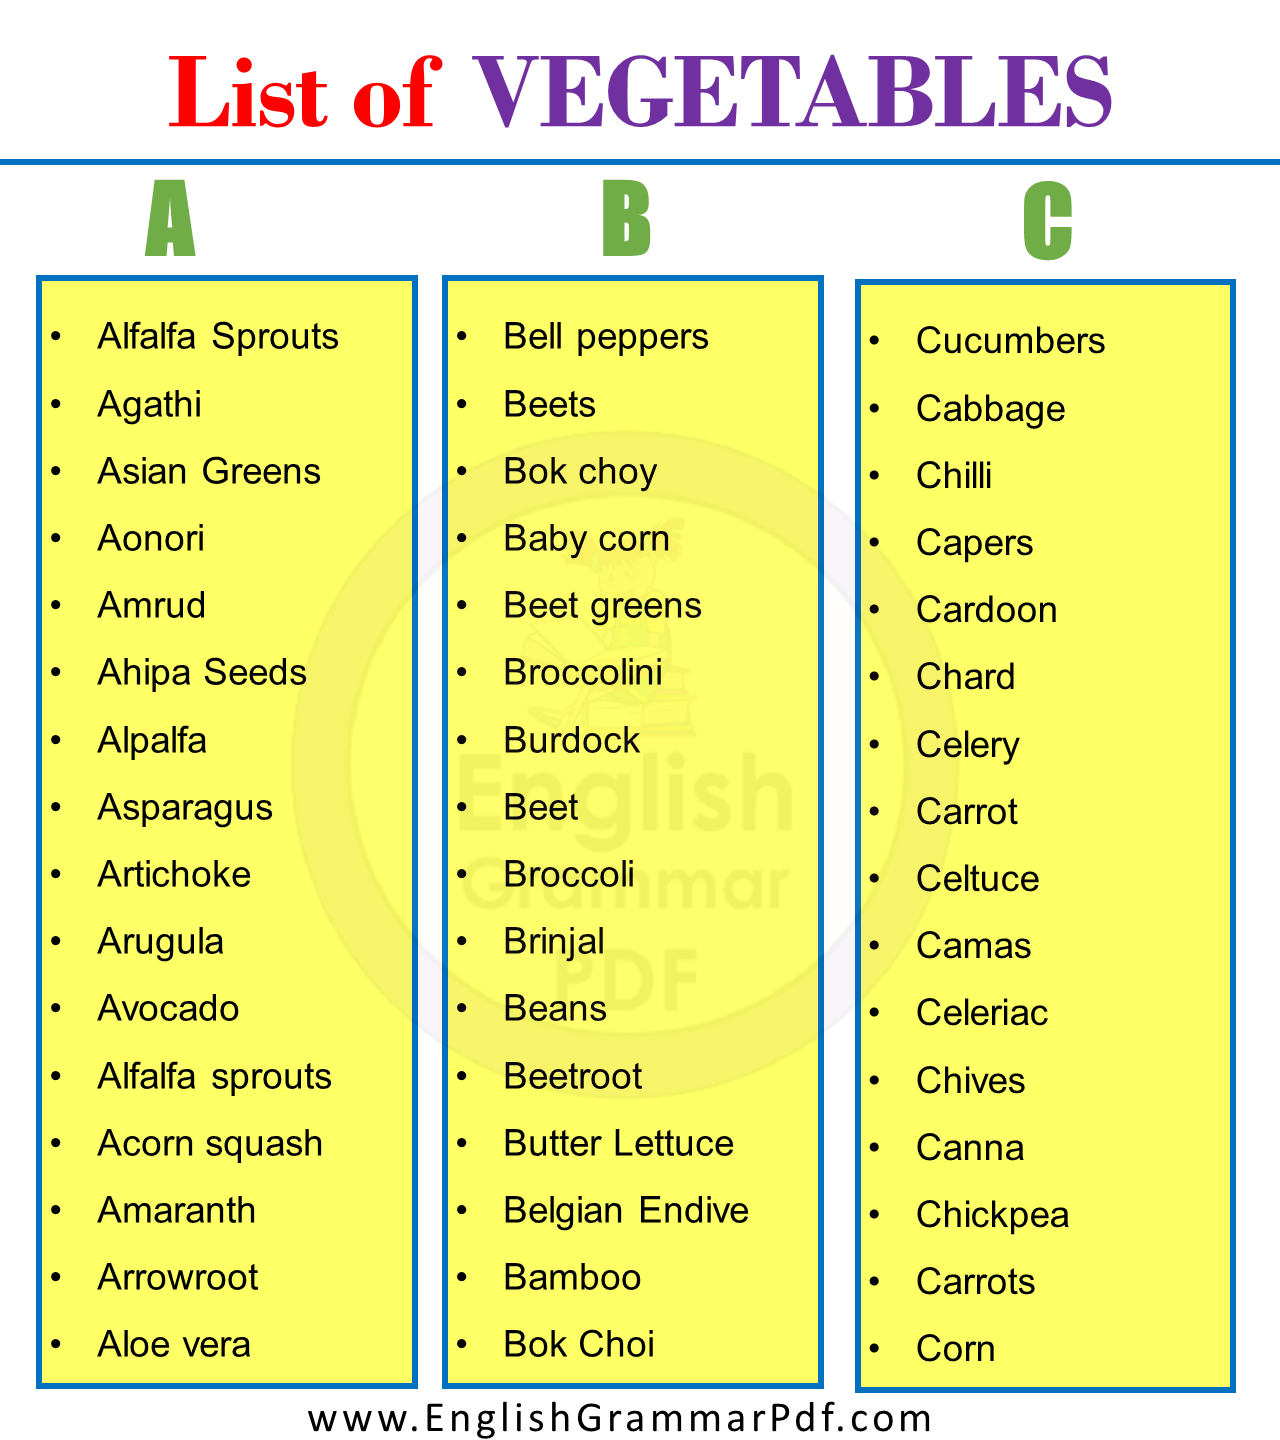 Vegetables That Start With A to Z